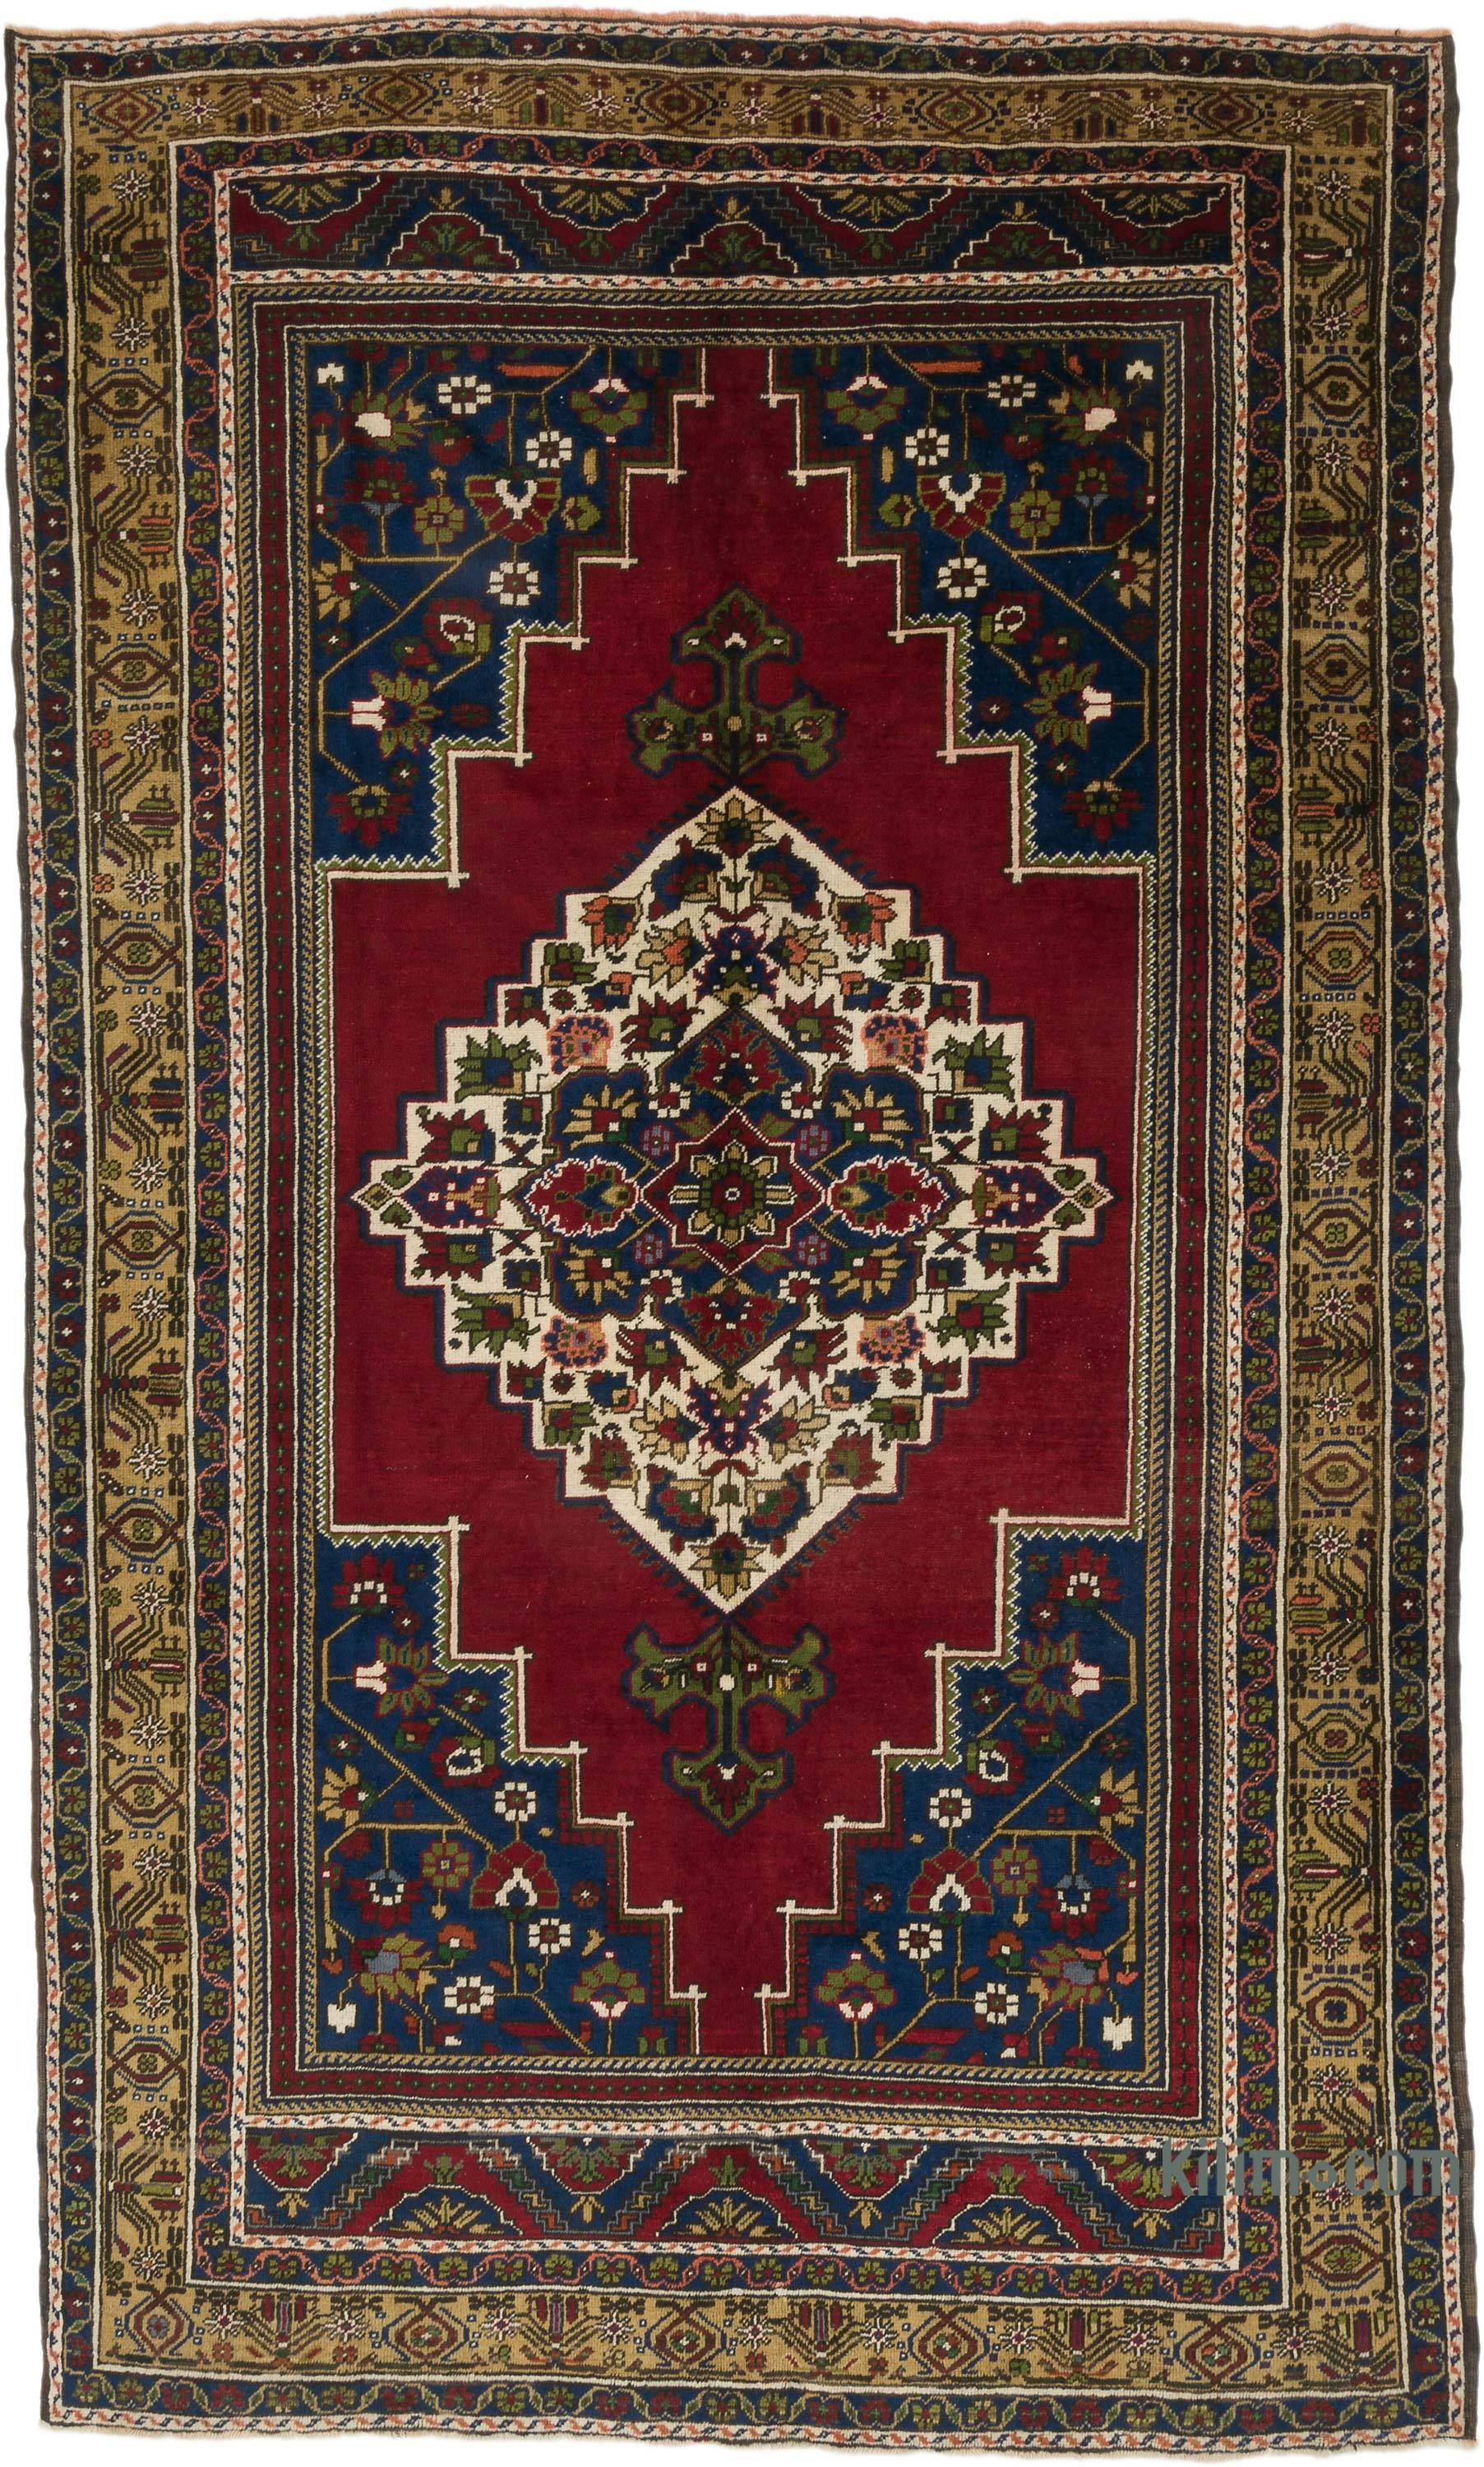 K0067775 Vintage Turkish Hand-Knotted Rug - 6' 1 x 10' 1 (73 x 121)   The Source for Vintage Rugs, Tribal Kilim Rugs, Wool Turkish Rugs, Overdyed  Persian Rugs, Runner Rugs, Patchwork